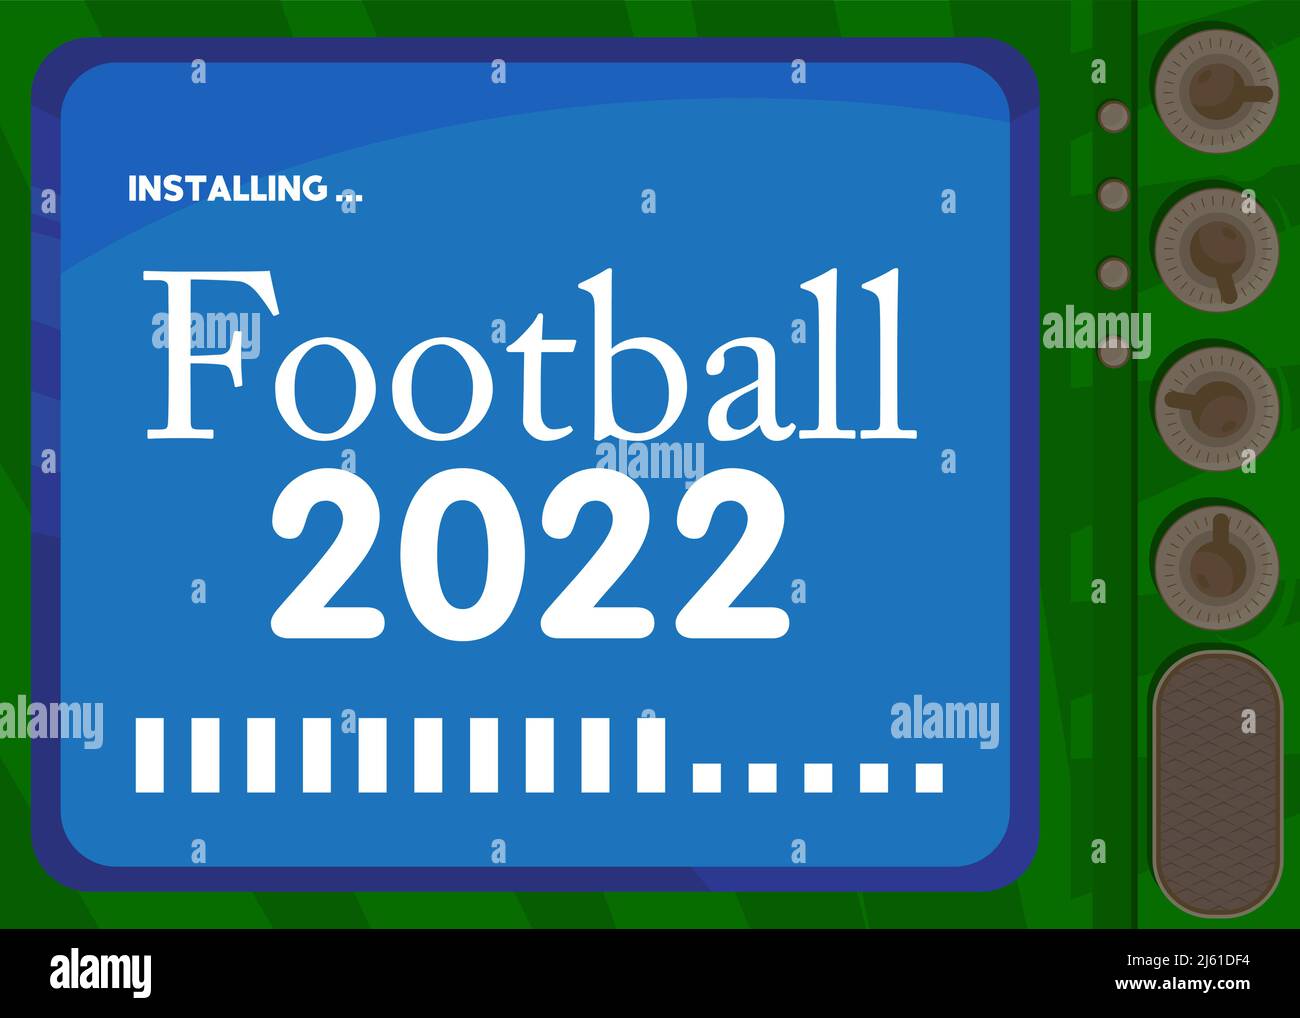 Cartoon Computer With the word Football 2022. Message of a screen displaying an installation window. Stock Vector